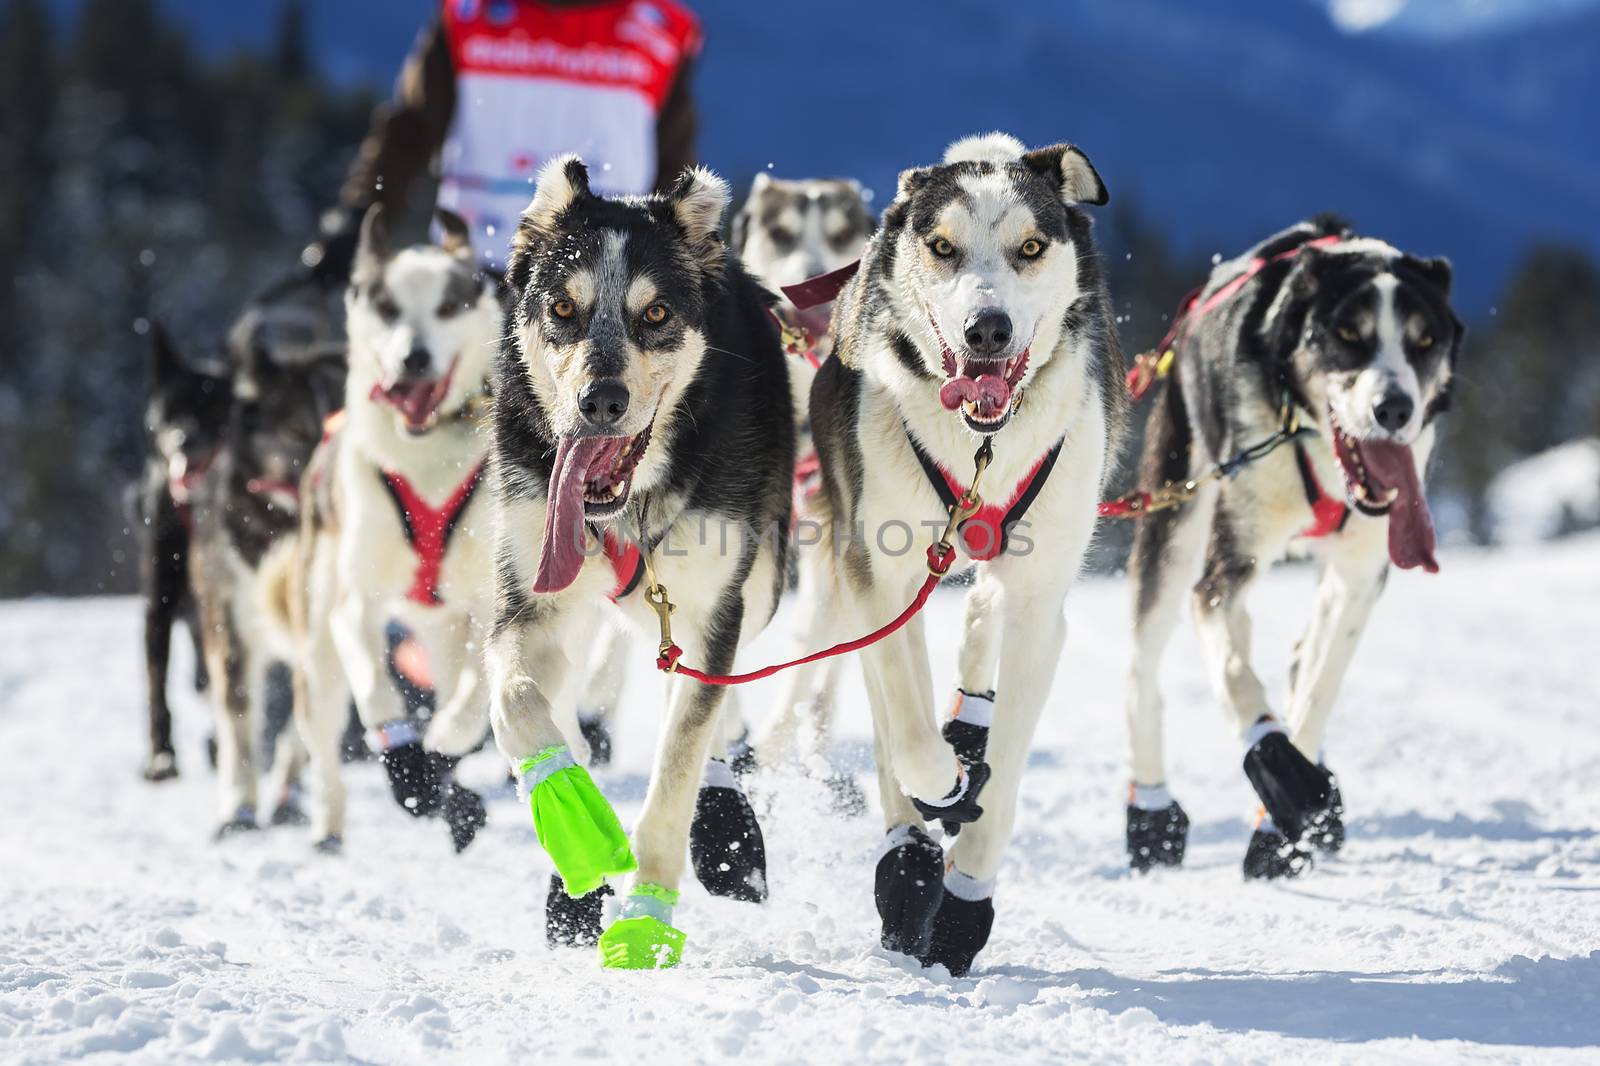 View of sled dog race on snow in France